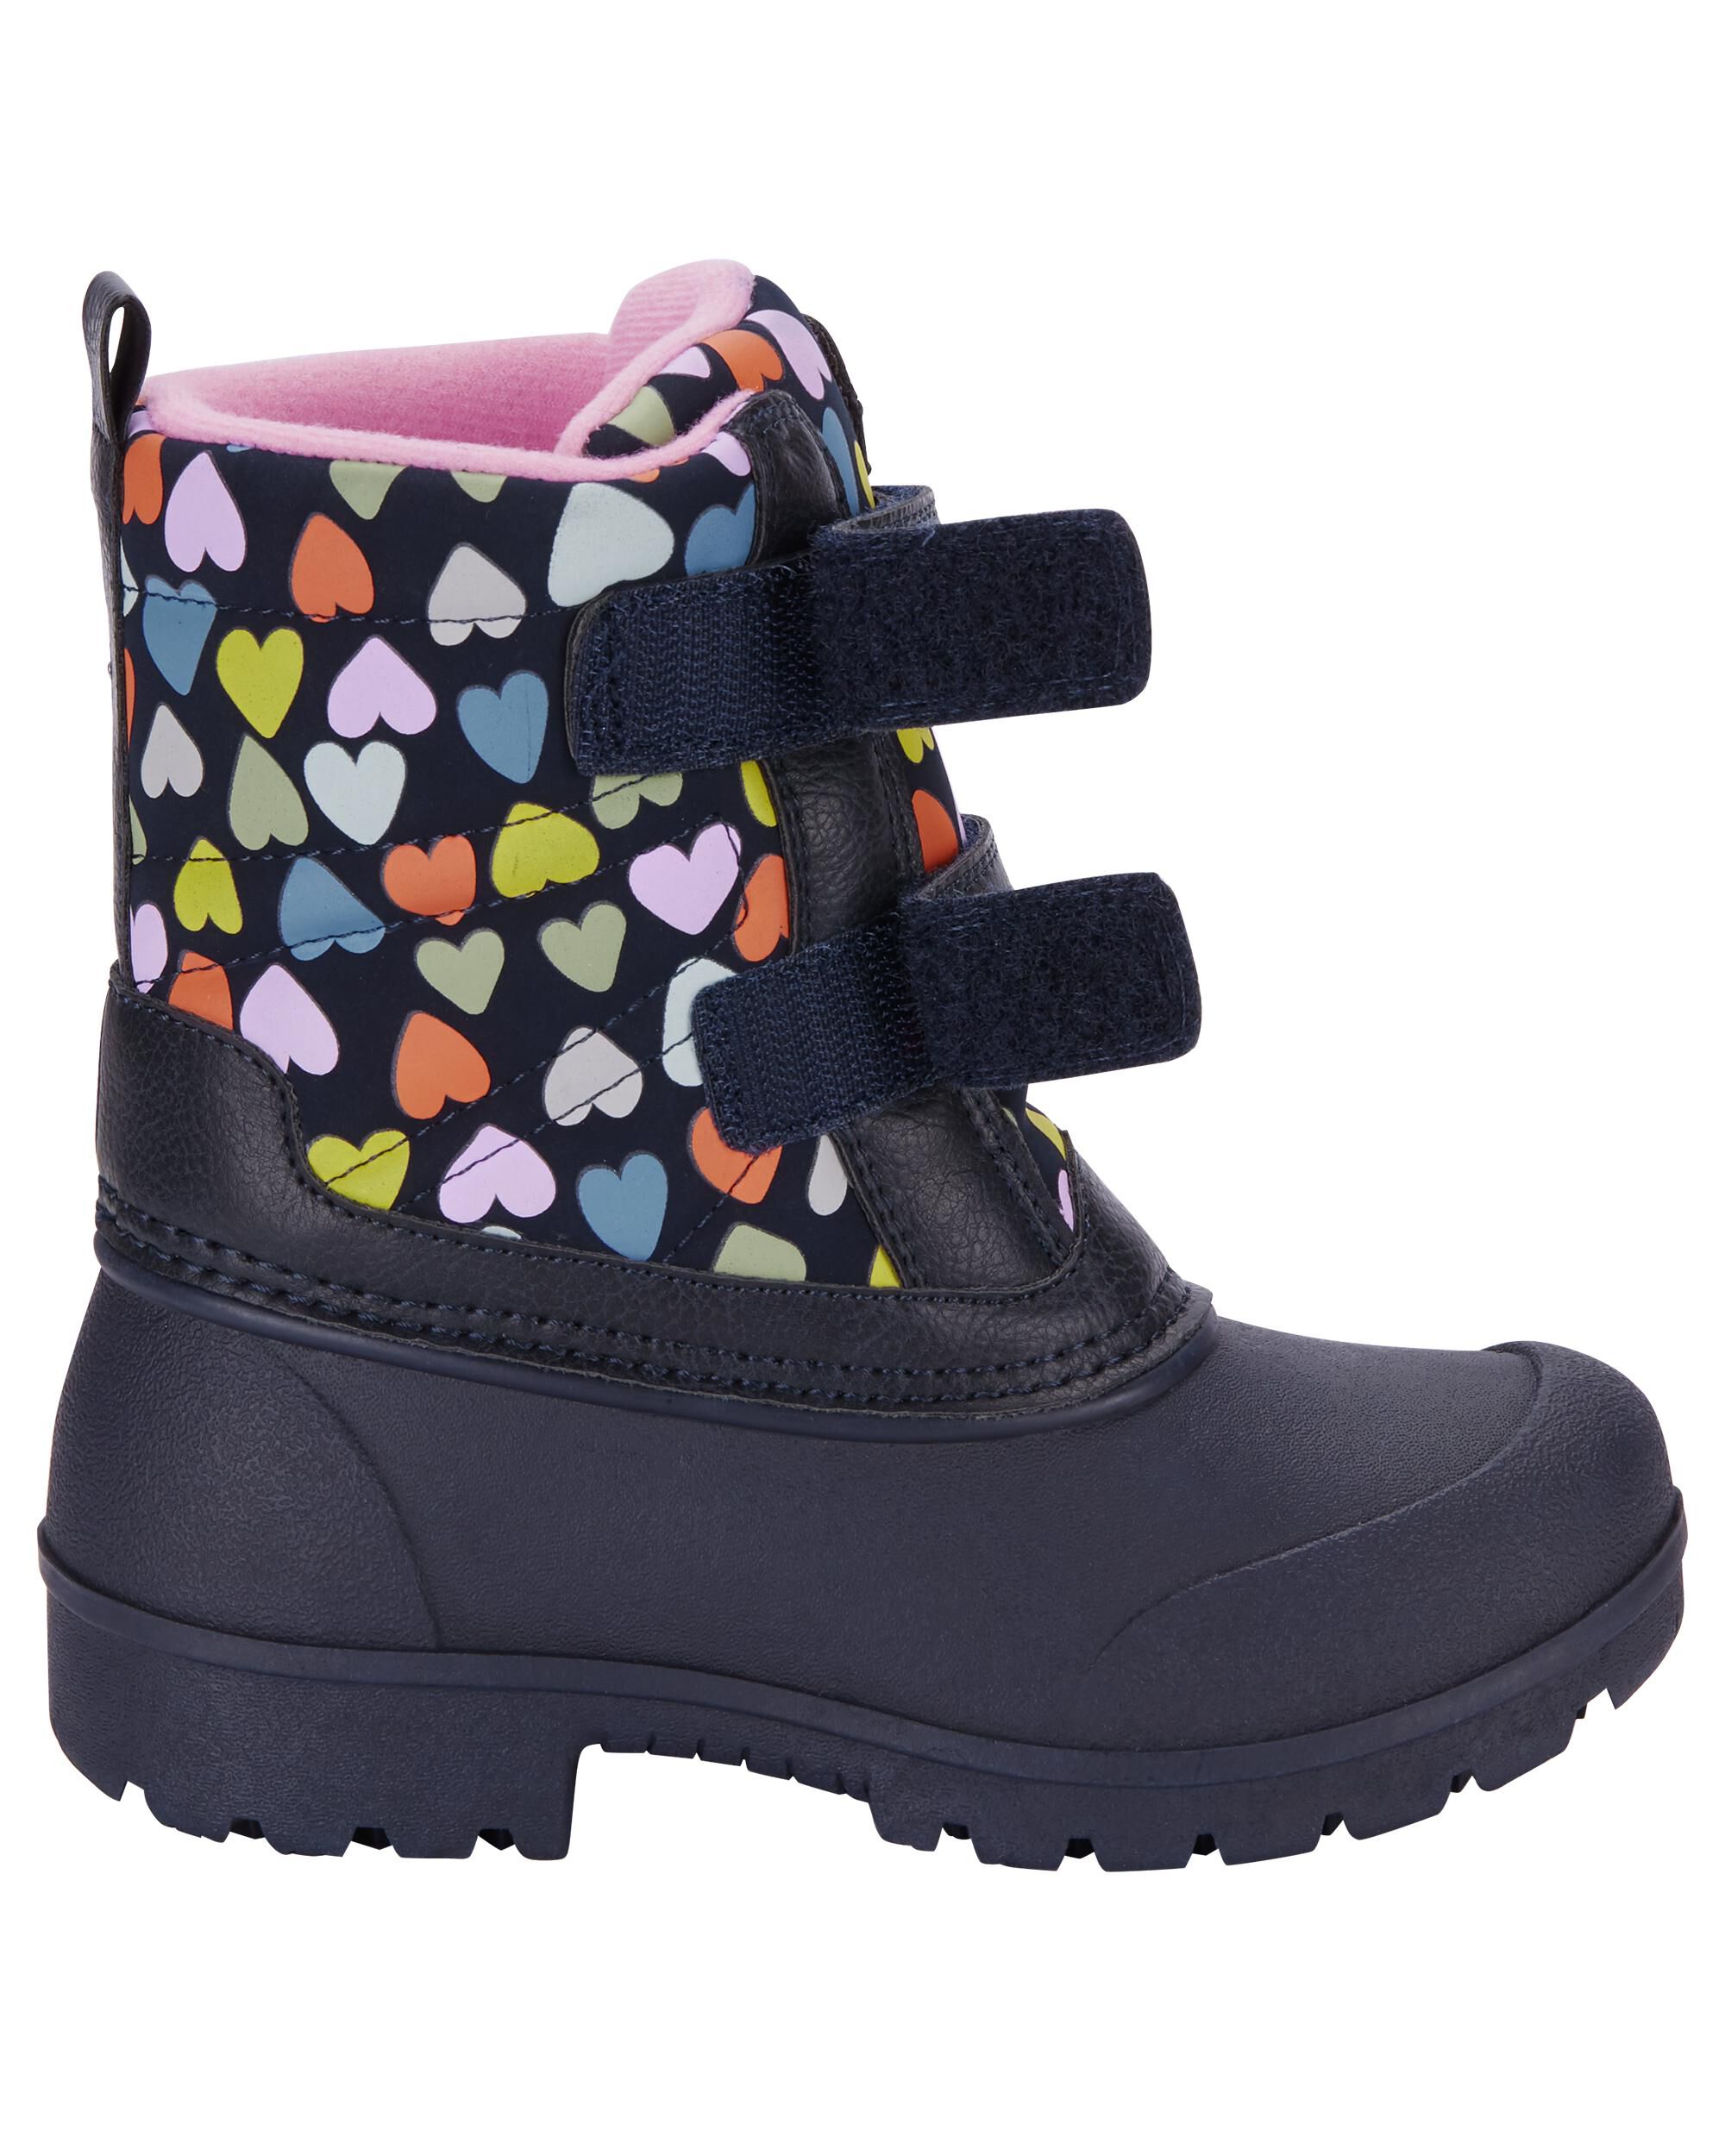 Carters Unisex-Child New Snow Boot 